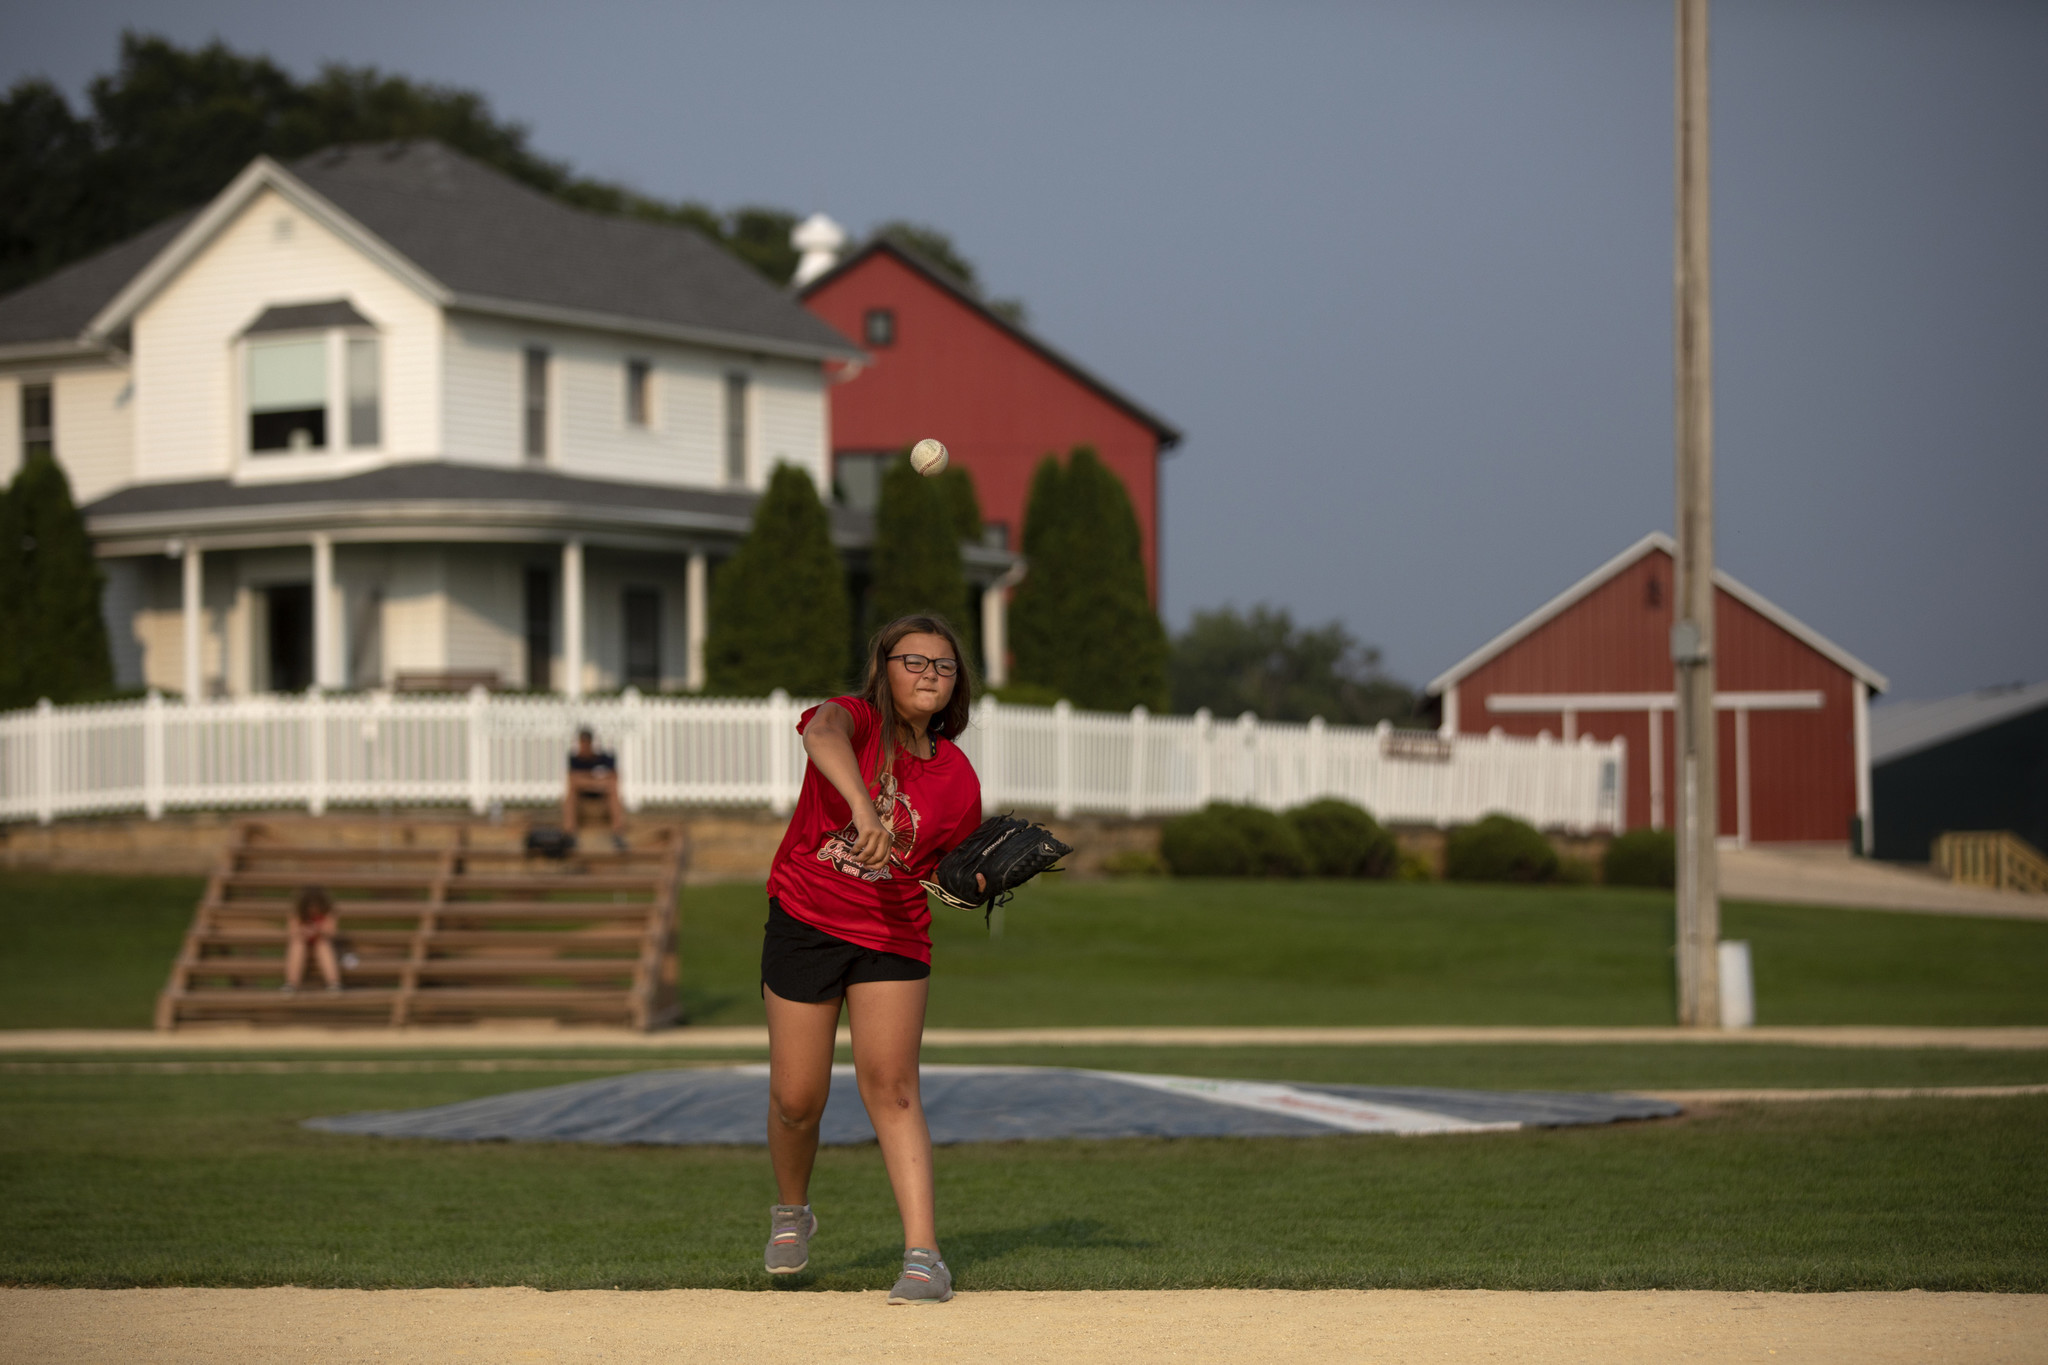 Photos: Field of Dreams game brings Hollywood to Midwest